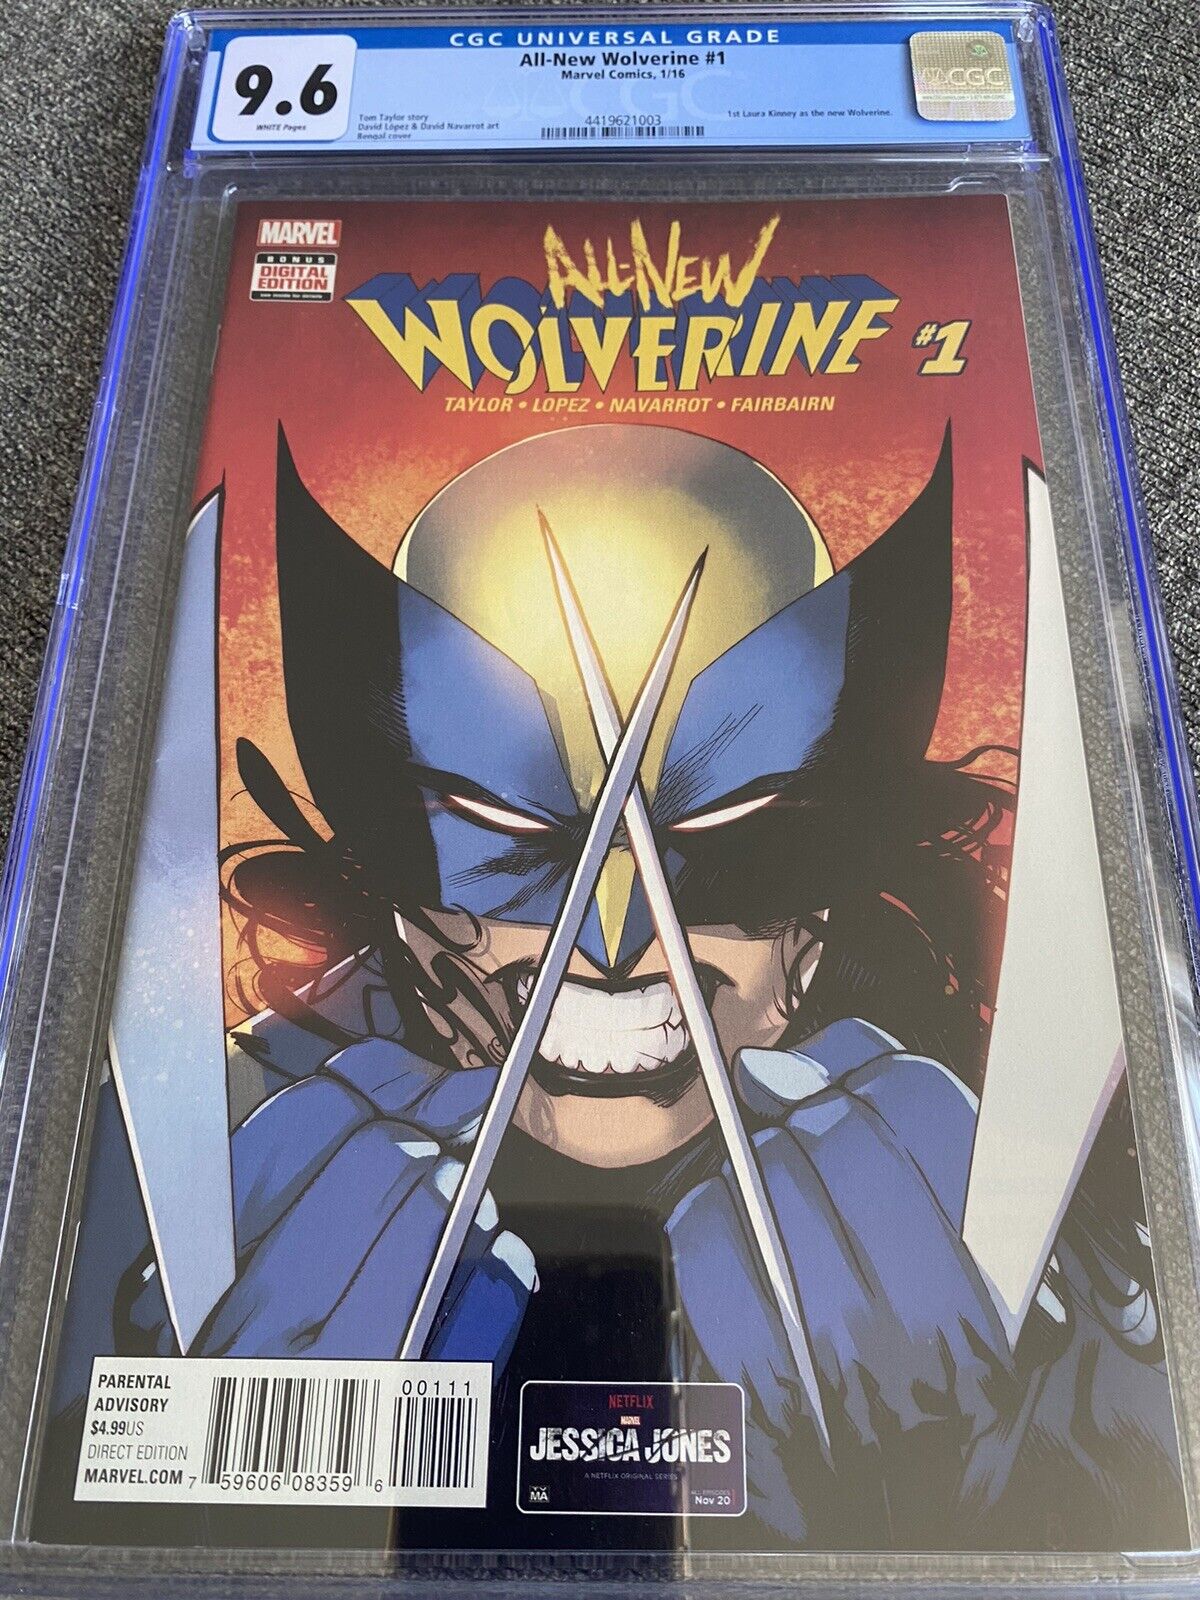 All-New Wolverine #1🔥CGC 9.6🔥1st Laura Kinney as the New Wolverine🔥New Case🔥